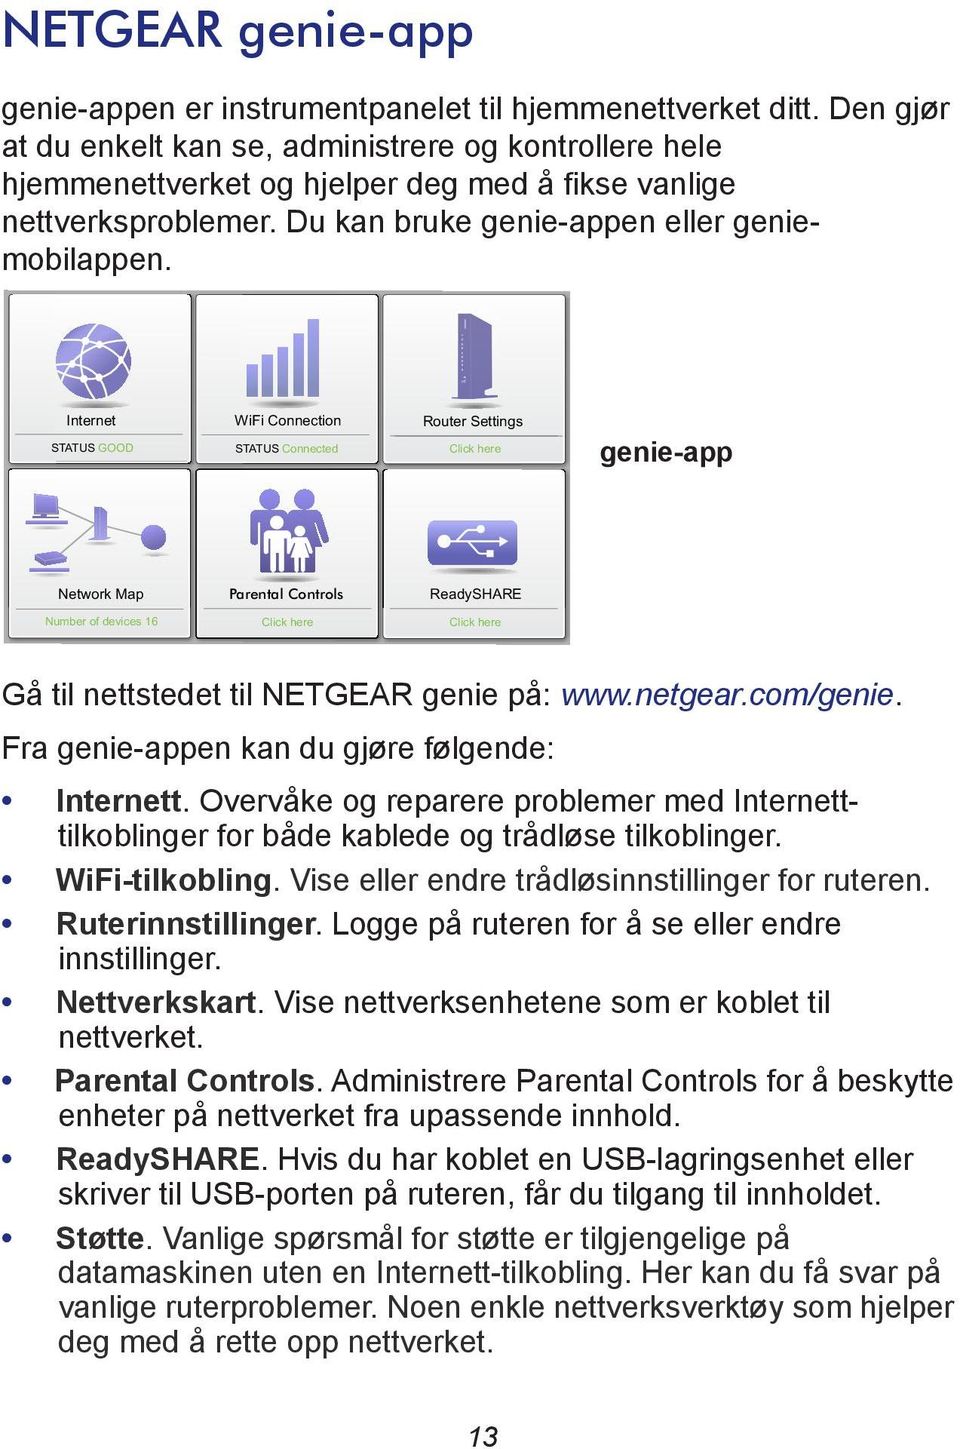 Internet STATUS GOOD WiFi Connection STATUS Connected Router Settings Click here genie-app Network Map Parental Controls ReadySHARE Number of devices 16 Click here Click here Gå til nettstedet til